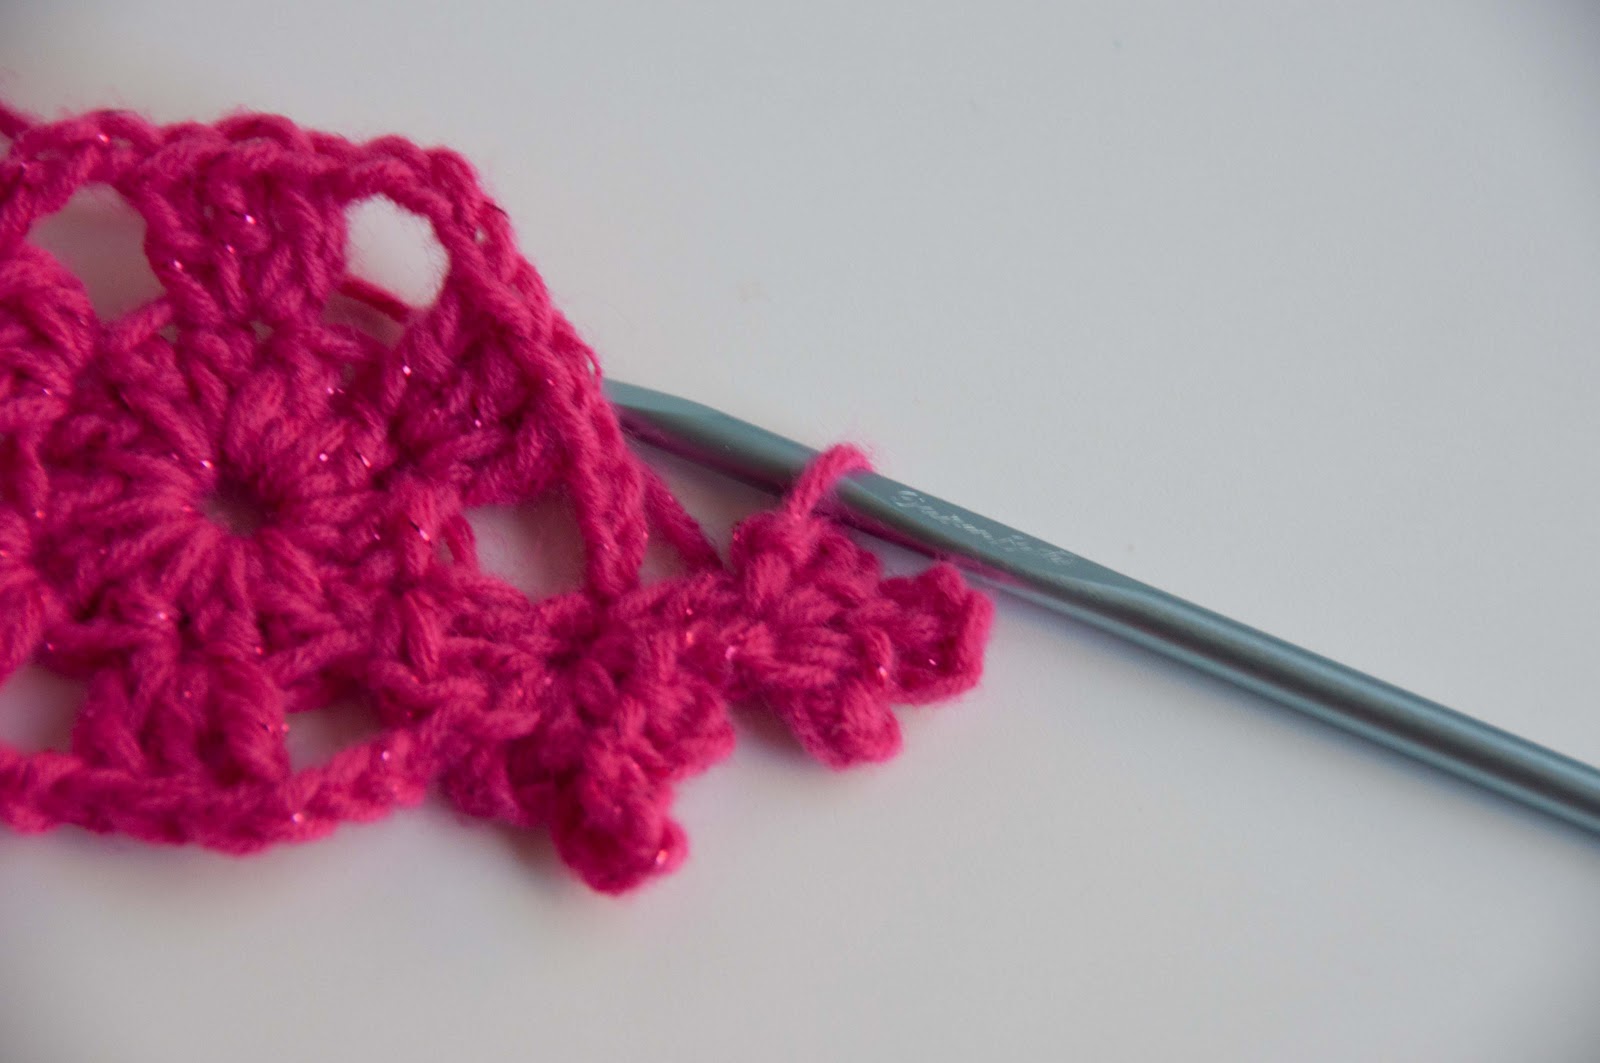 How To Make A Sl St Crochet